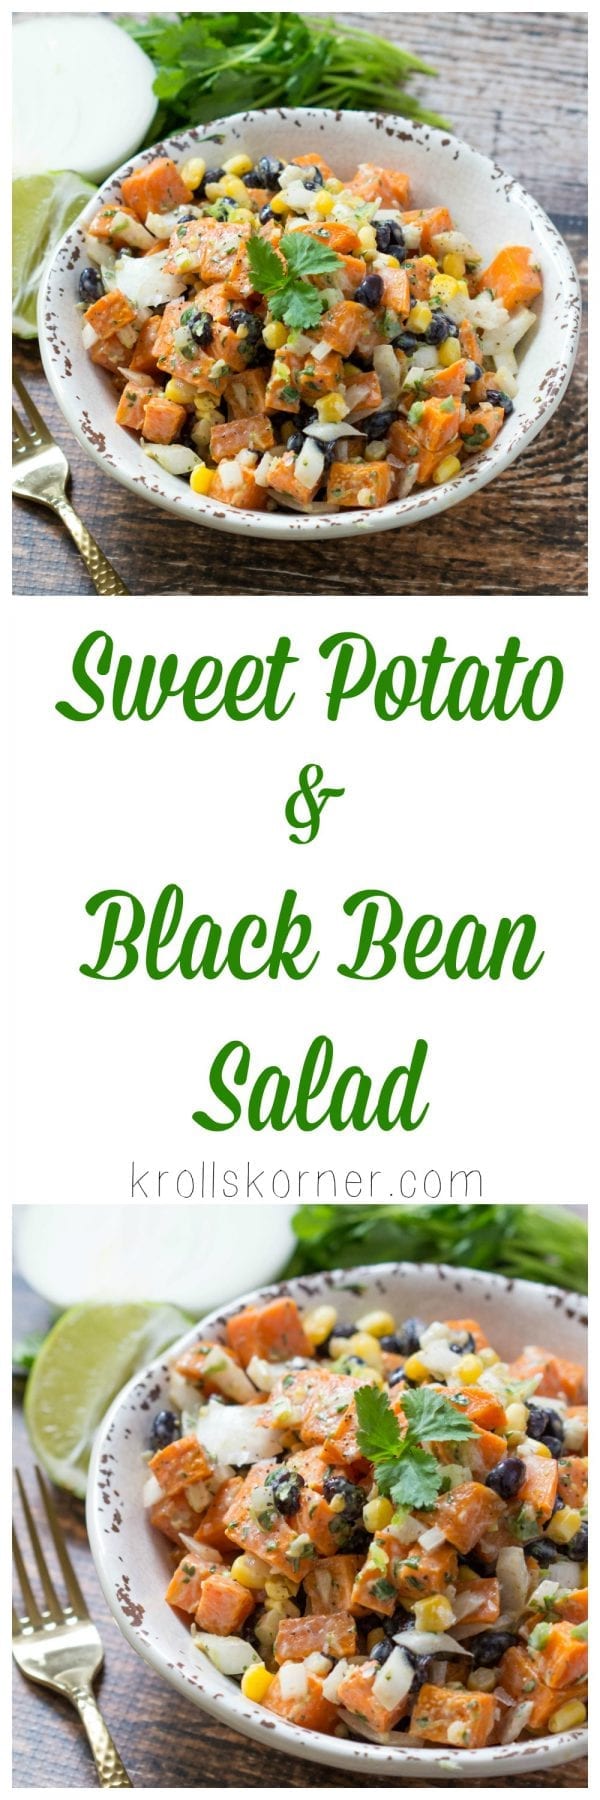 Sweet Potato and Black Bean Salad - perfect for Meatless Monday!